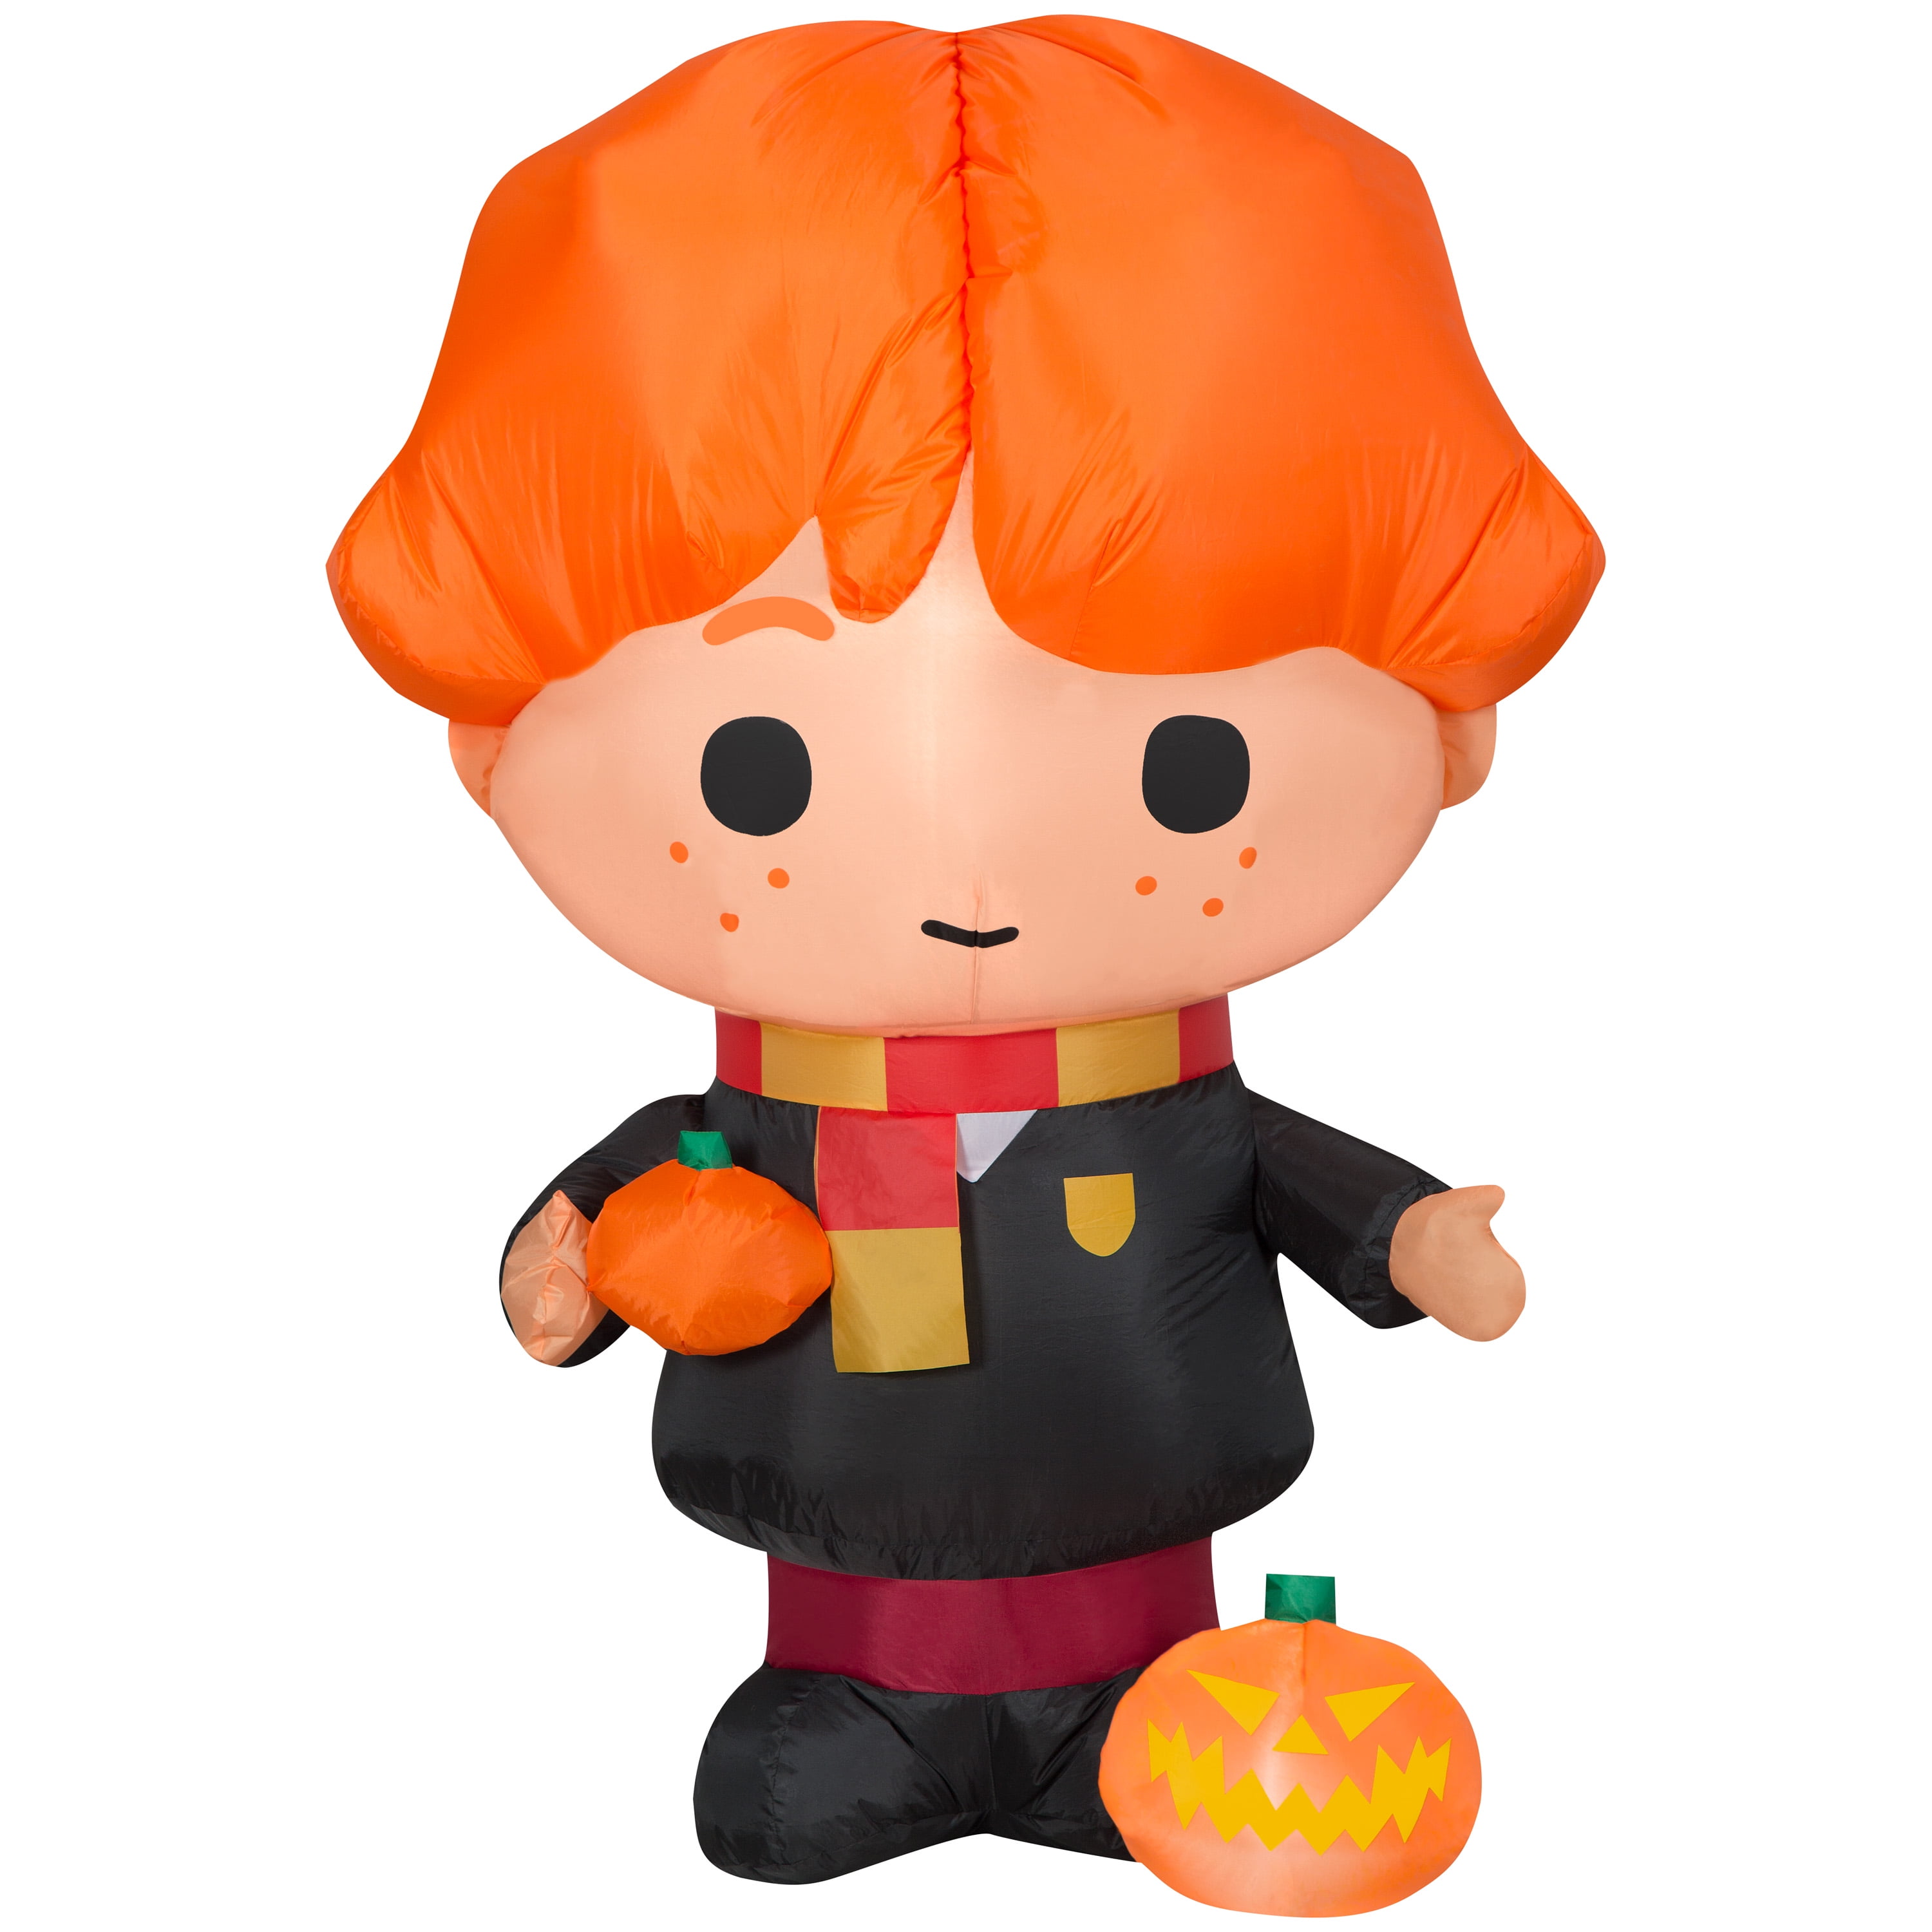 MAY198249 - HP SORCERERS STONE RON WEASLEY 1/6 AF CHILD HALLOWEEN